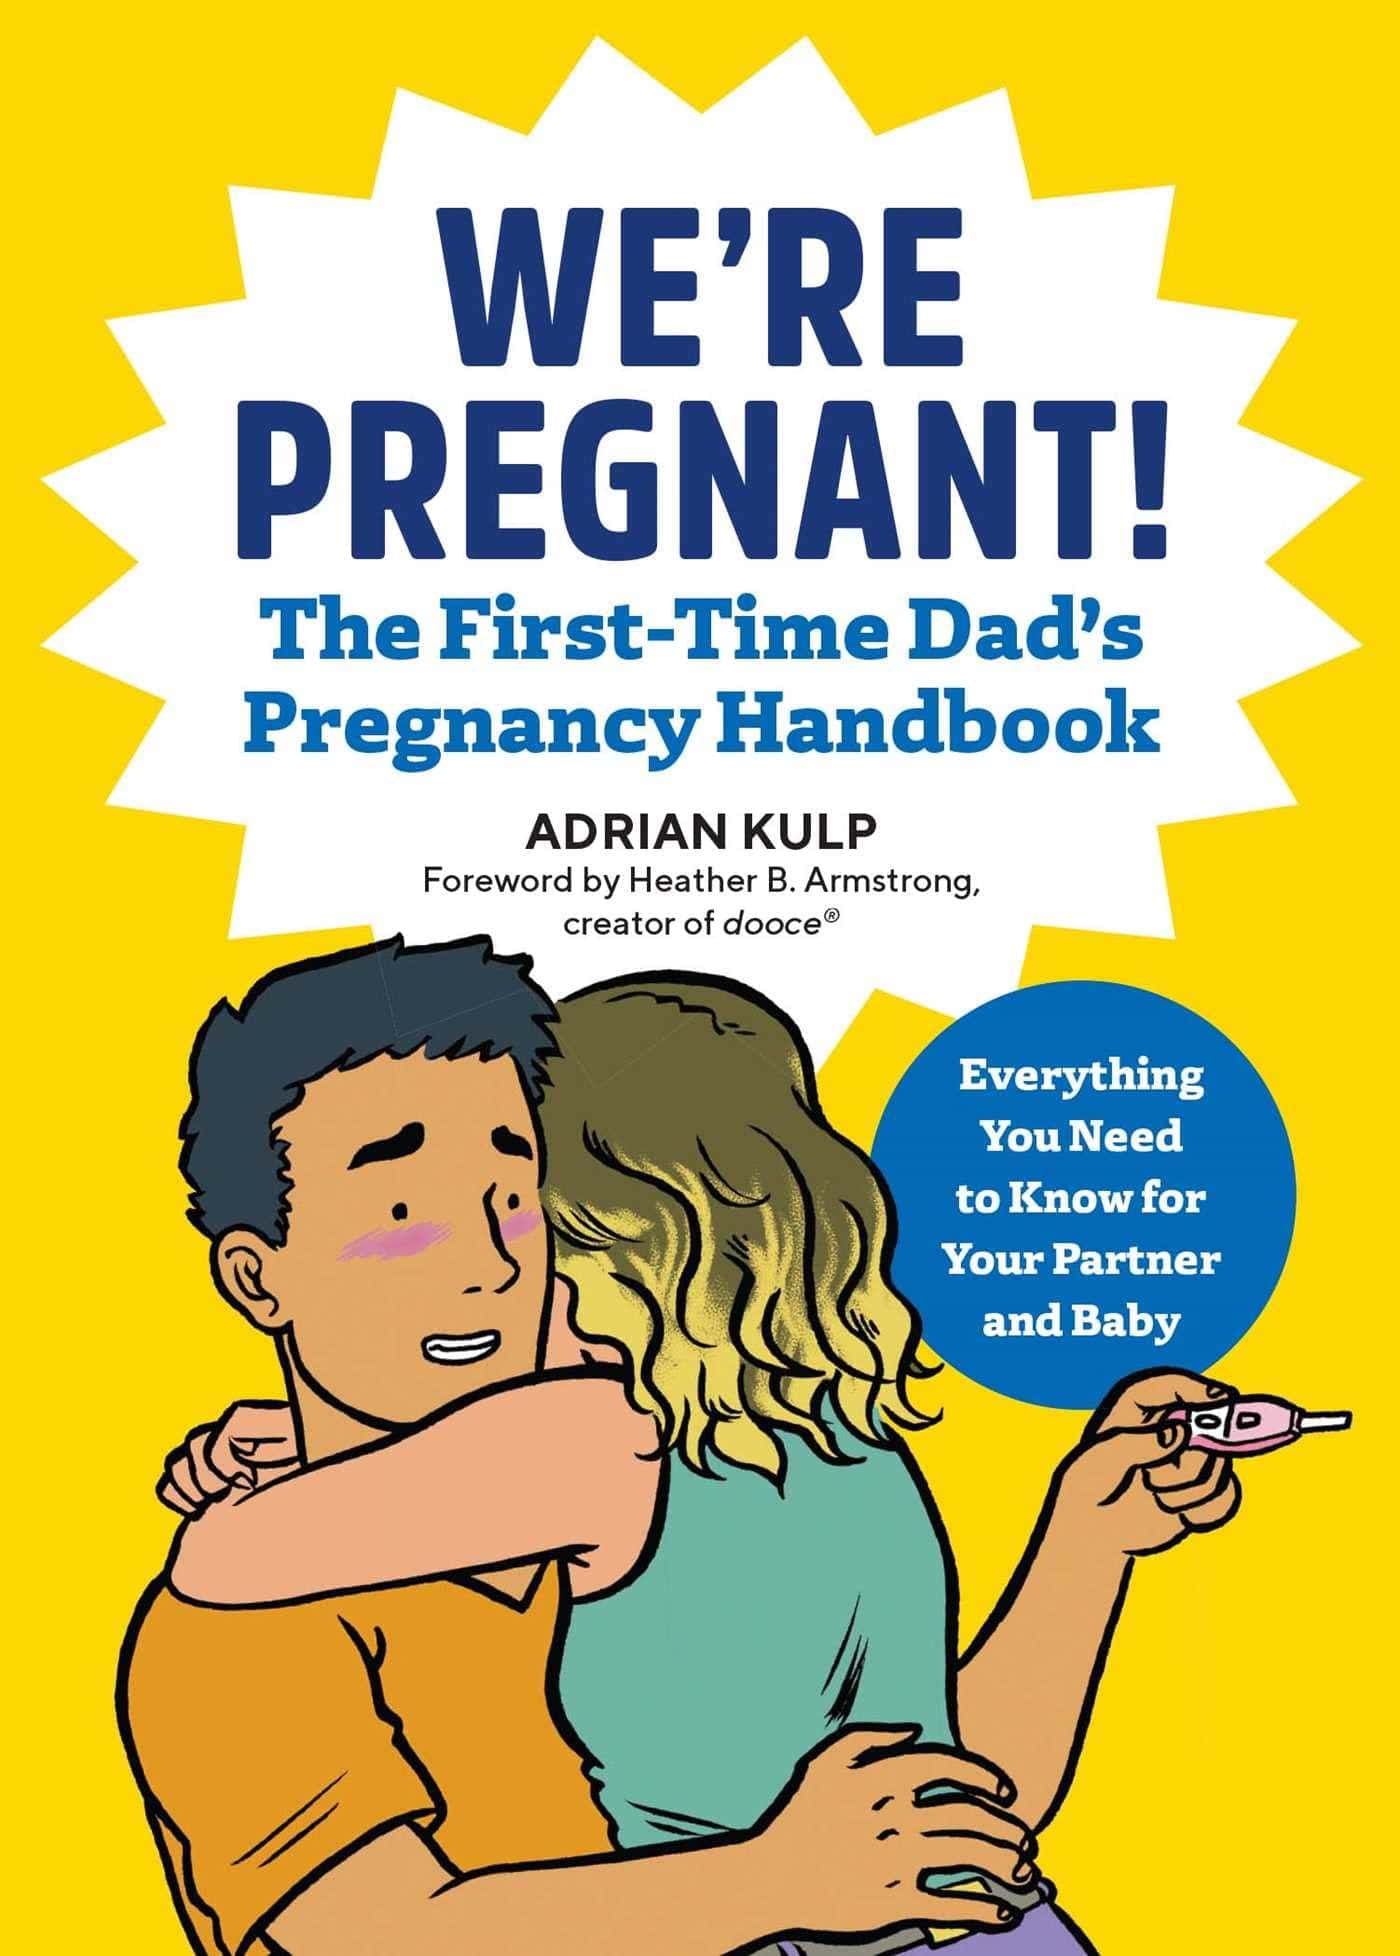 "We're Pregnant! The First Time Dad's Pregnancy Handbook" by Adrian Kulp